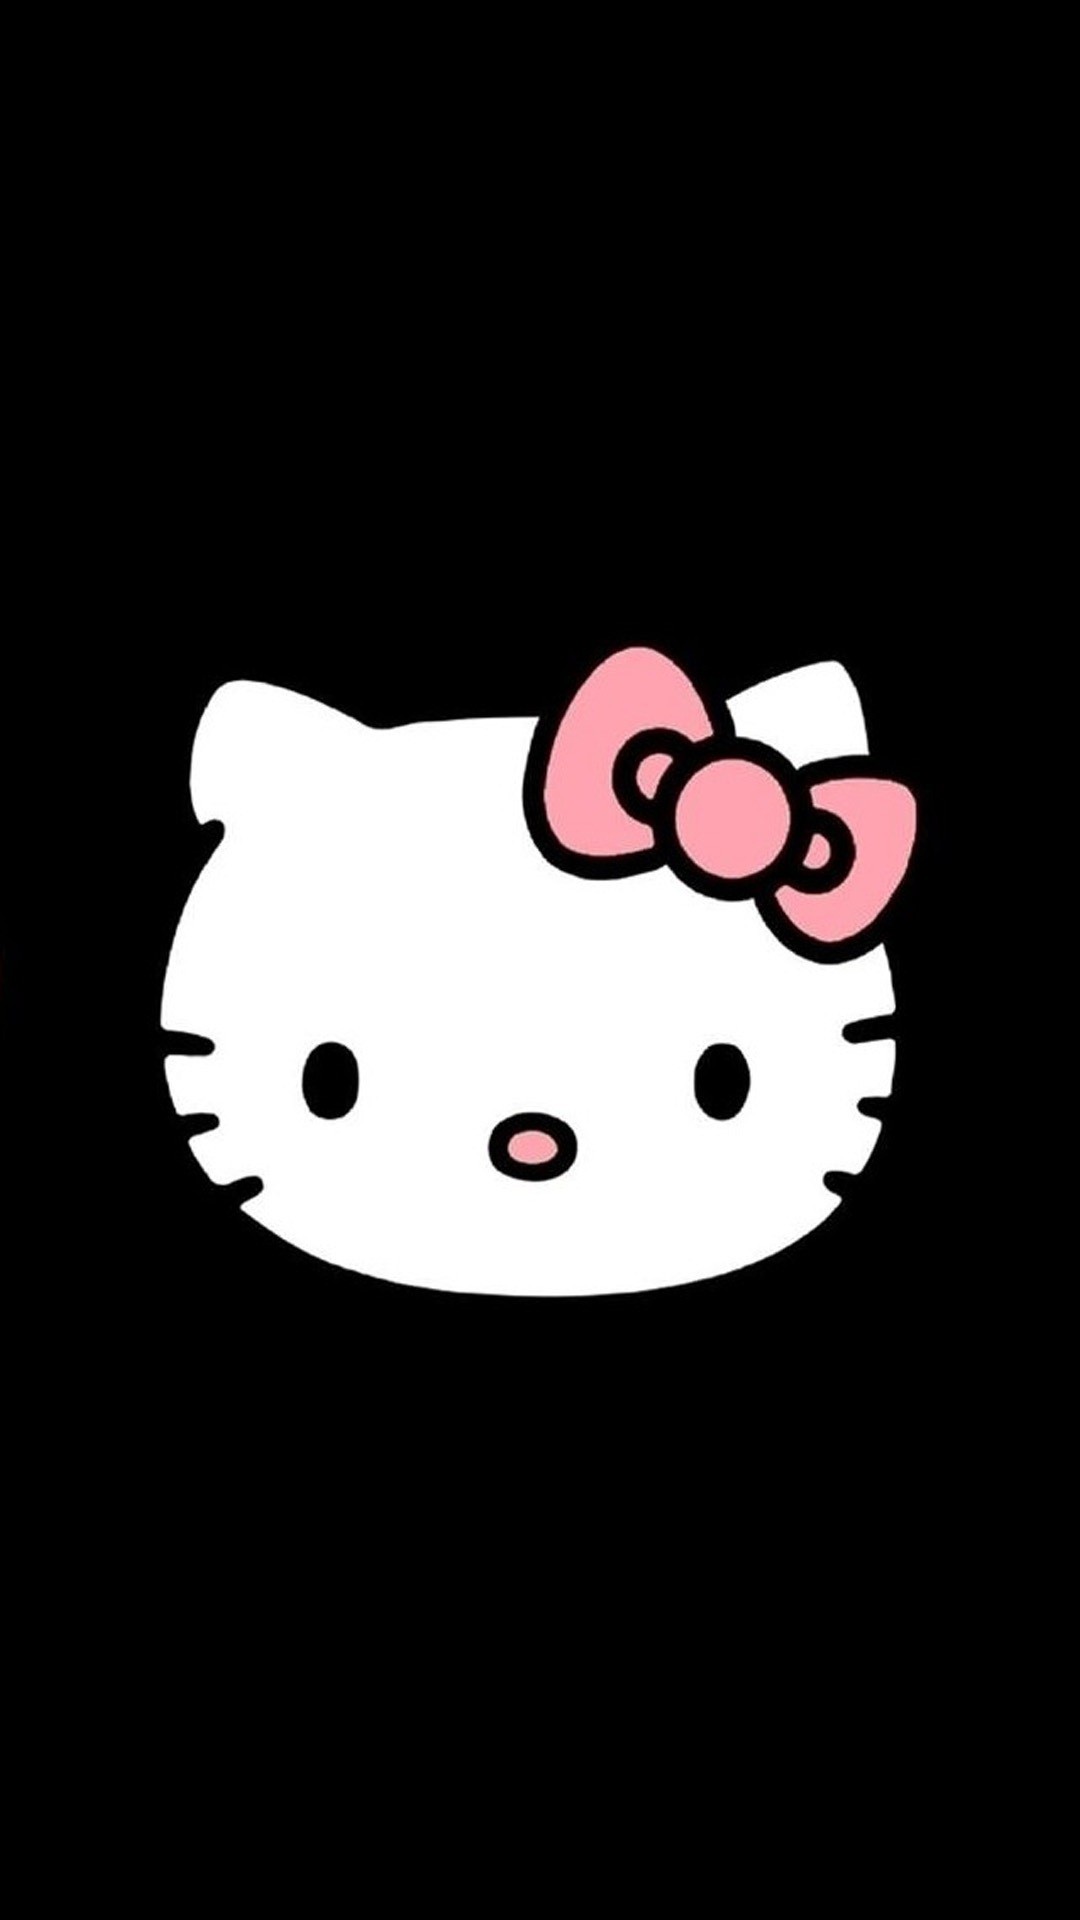 1080x1920 cute hello kitty wallpaper image for iphone mobile